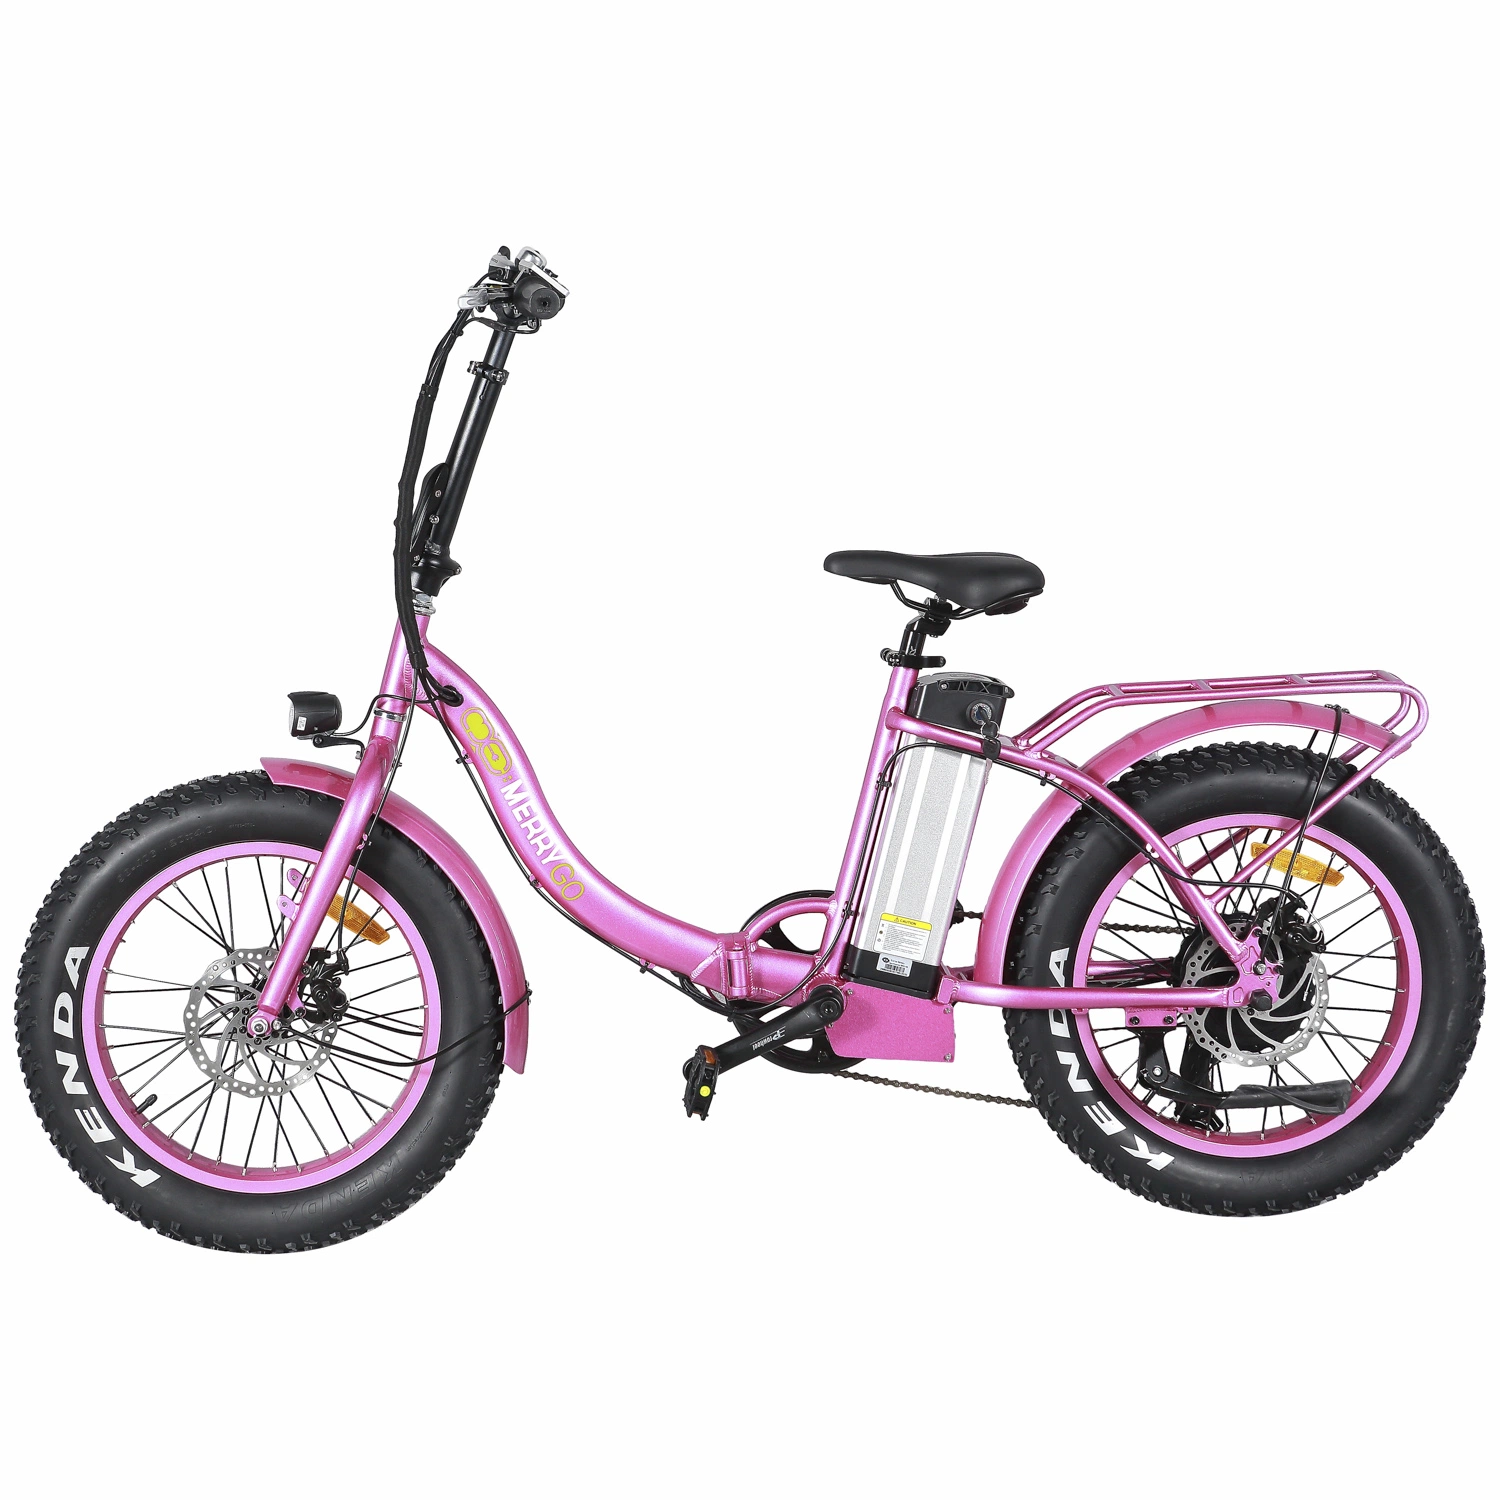 250W Foldable Electric Bicycle 20 Inch Ebike Ce Certification Cheap Folding Electric Hot Pocket Bike